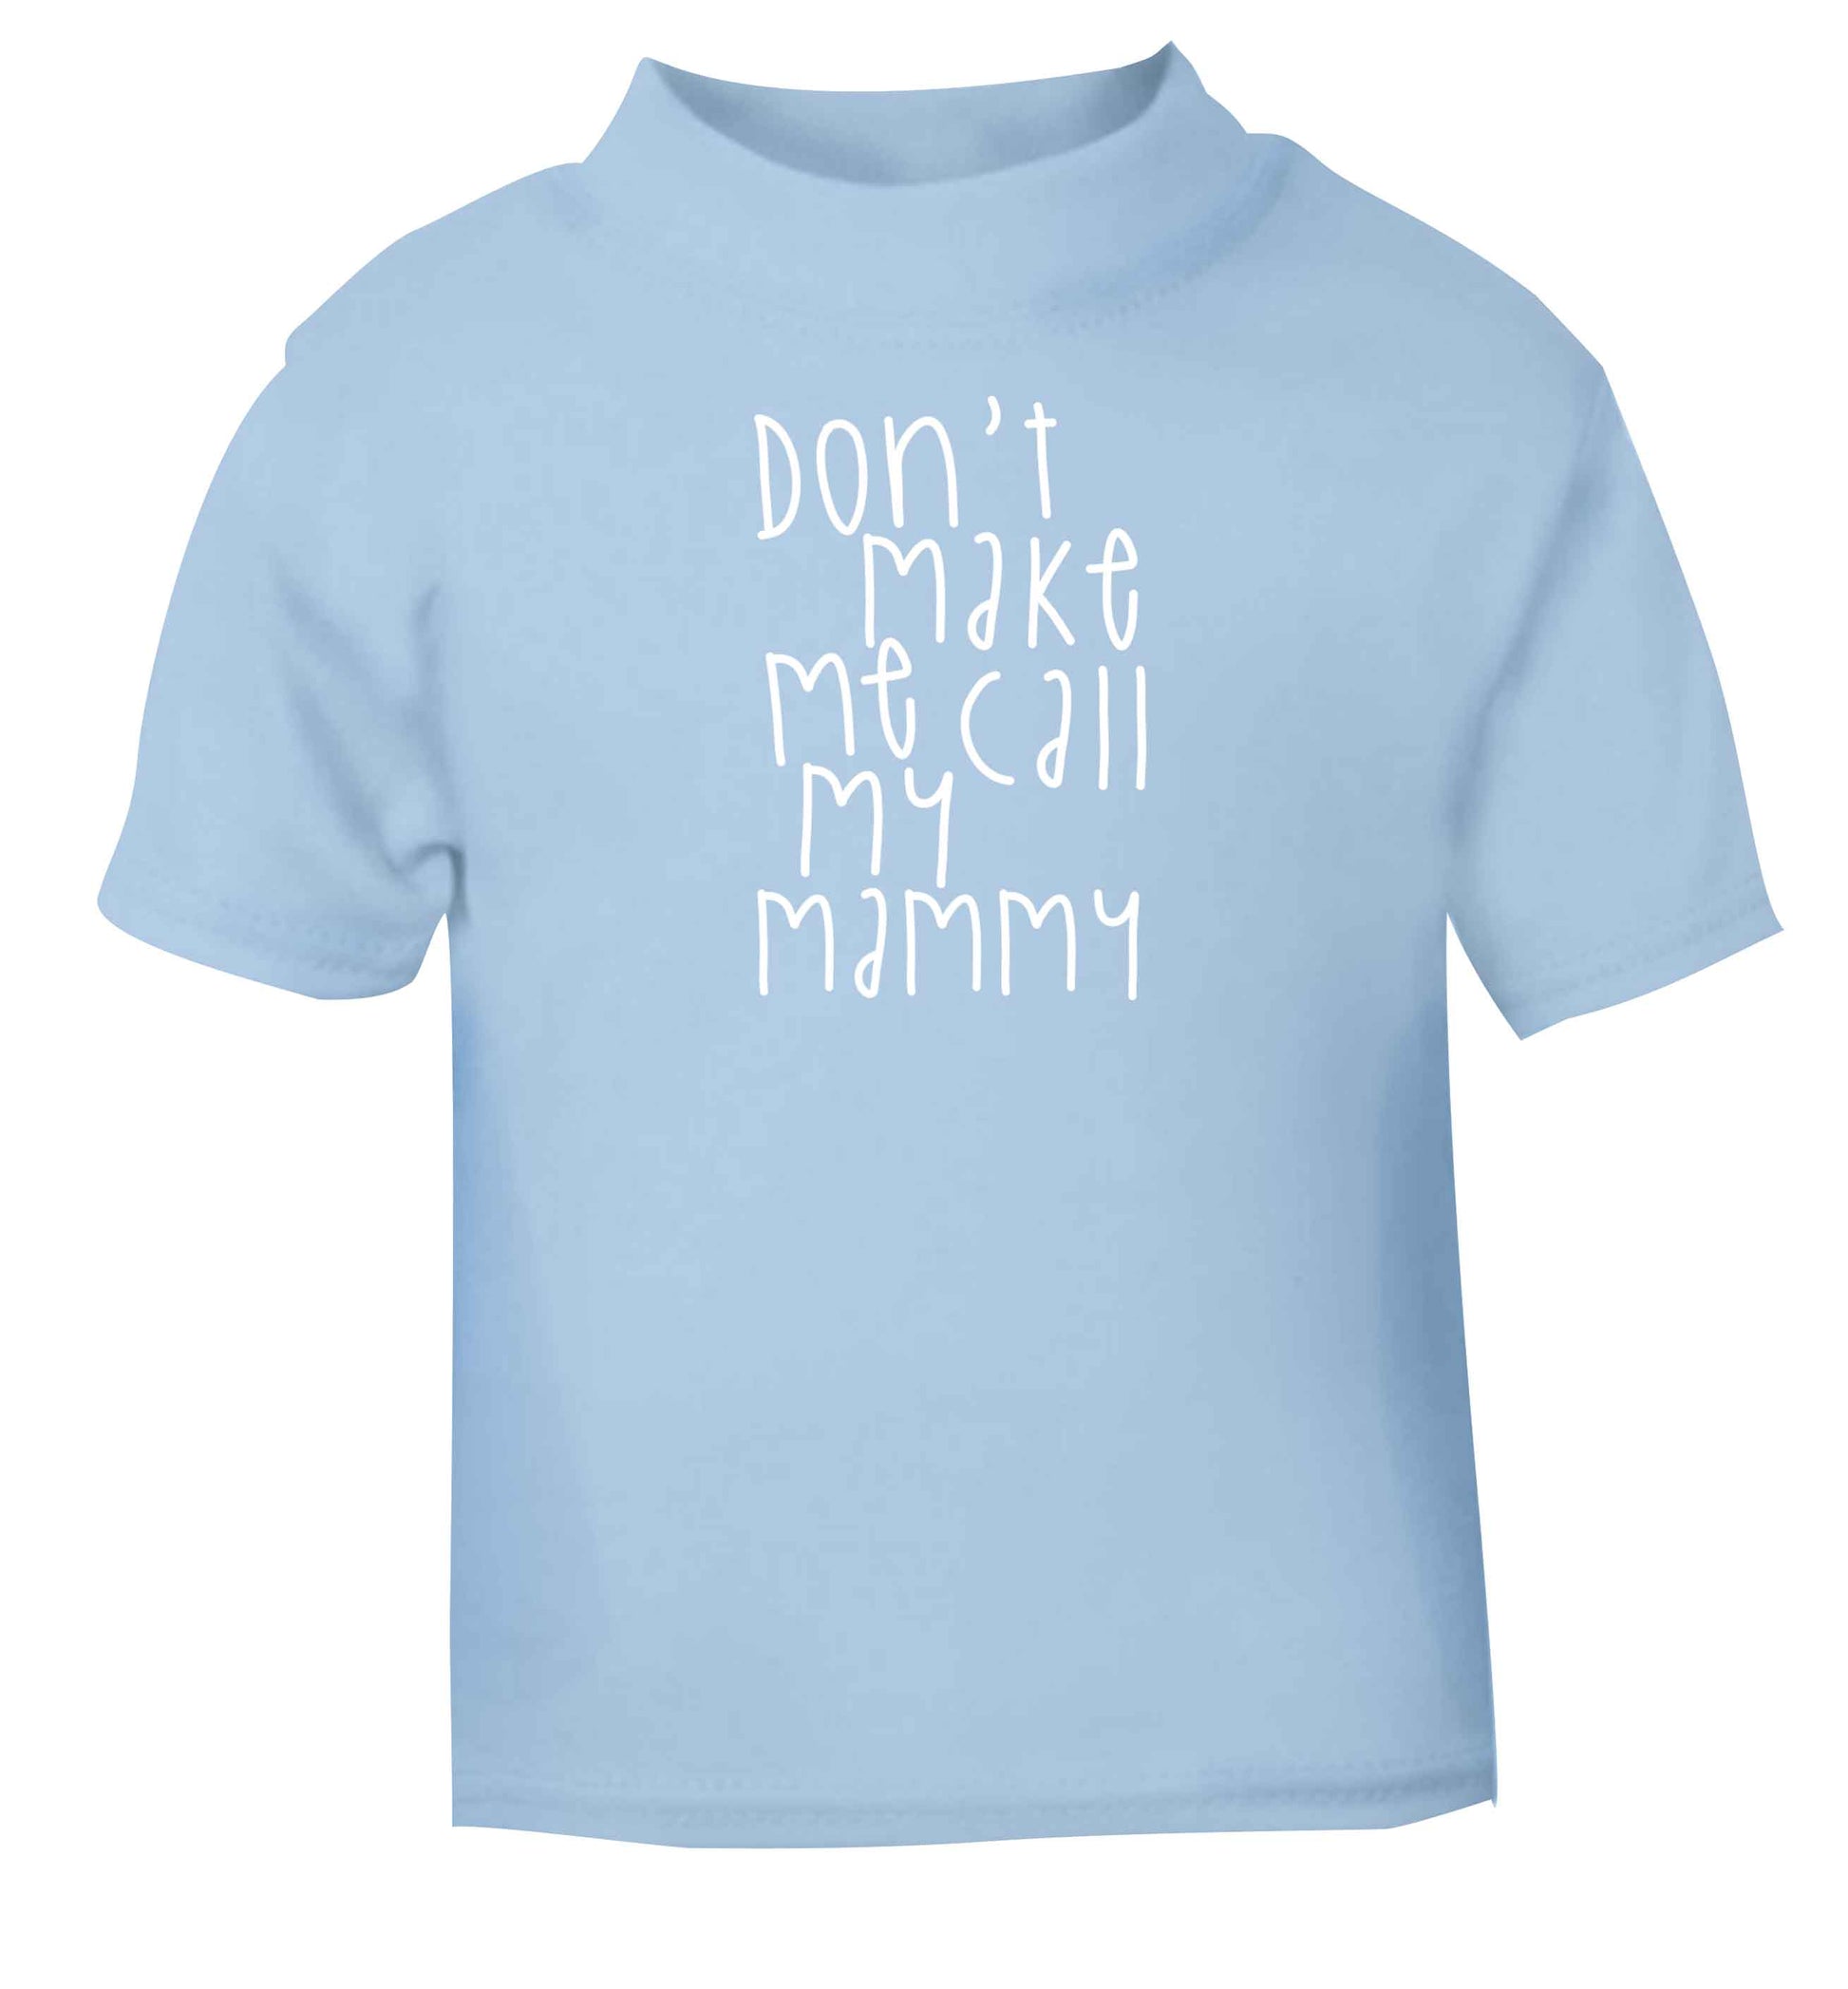 Don't make me call my mammy light blue baby toddler Tshirt 2 Years